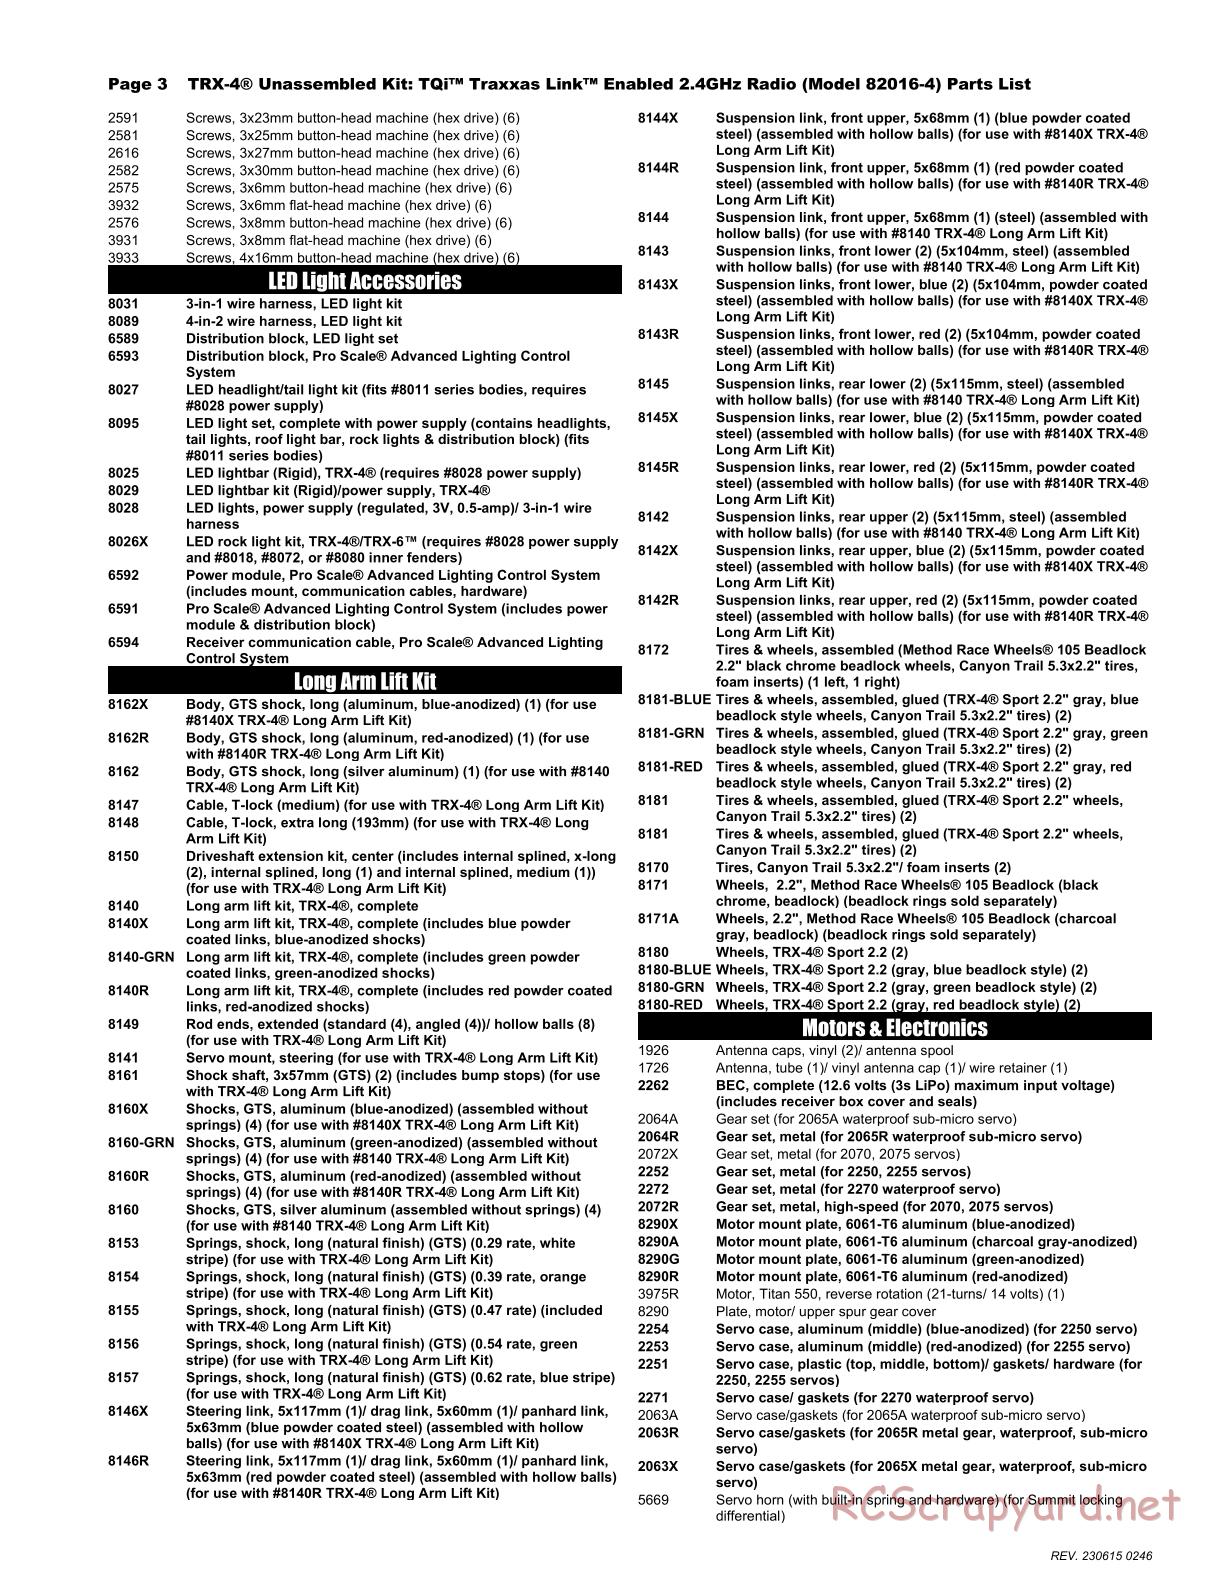 Traxxas - TRX-4 Chassis (2018) - Parts List - Page 3